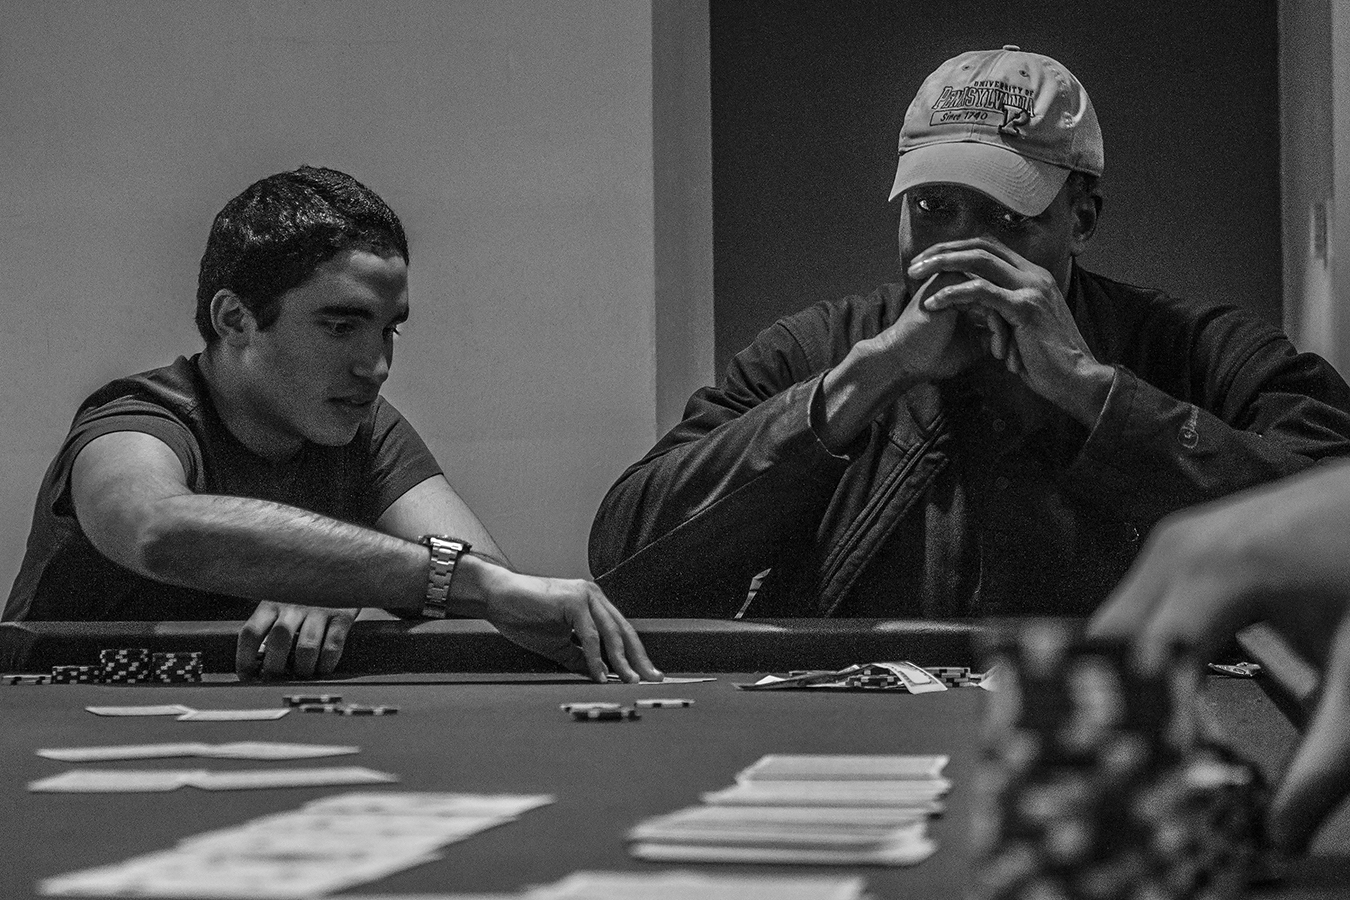 underground poker games at Upenn.Photography by Penn student Angelo Munafo, Copyright 2015.